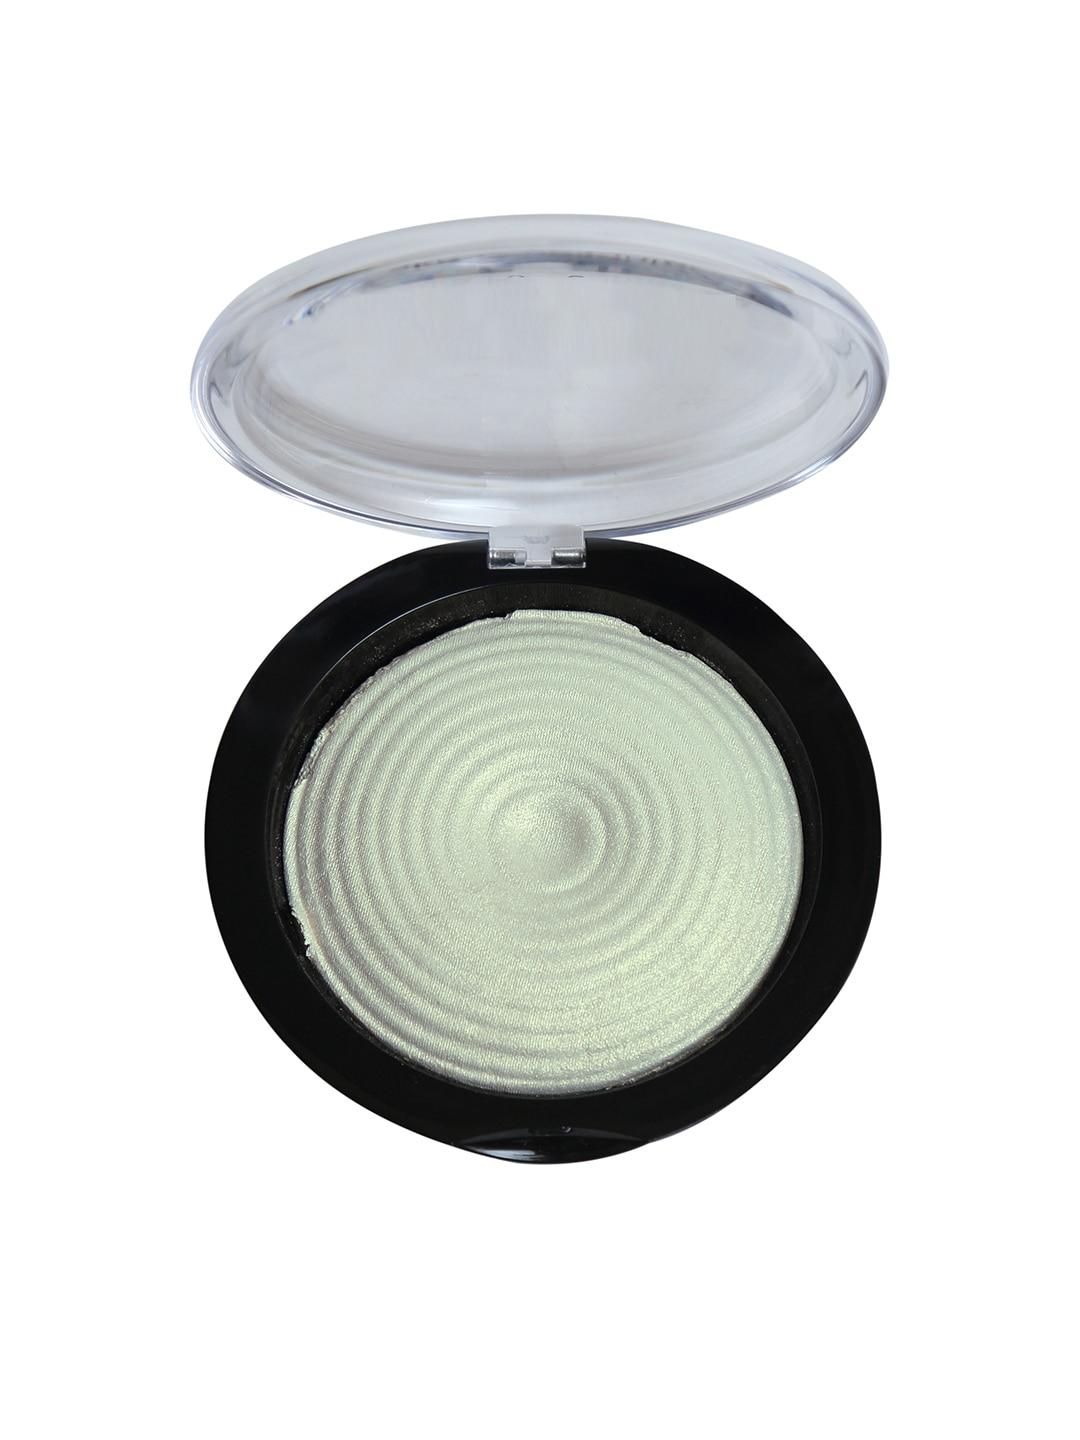 miss-claire-02-baked-highlighter-8-g